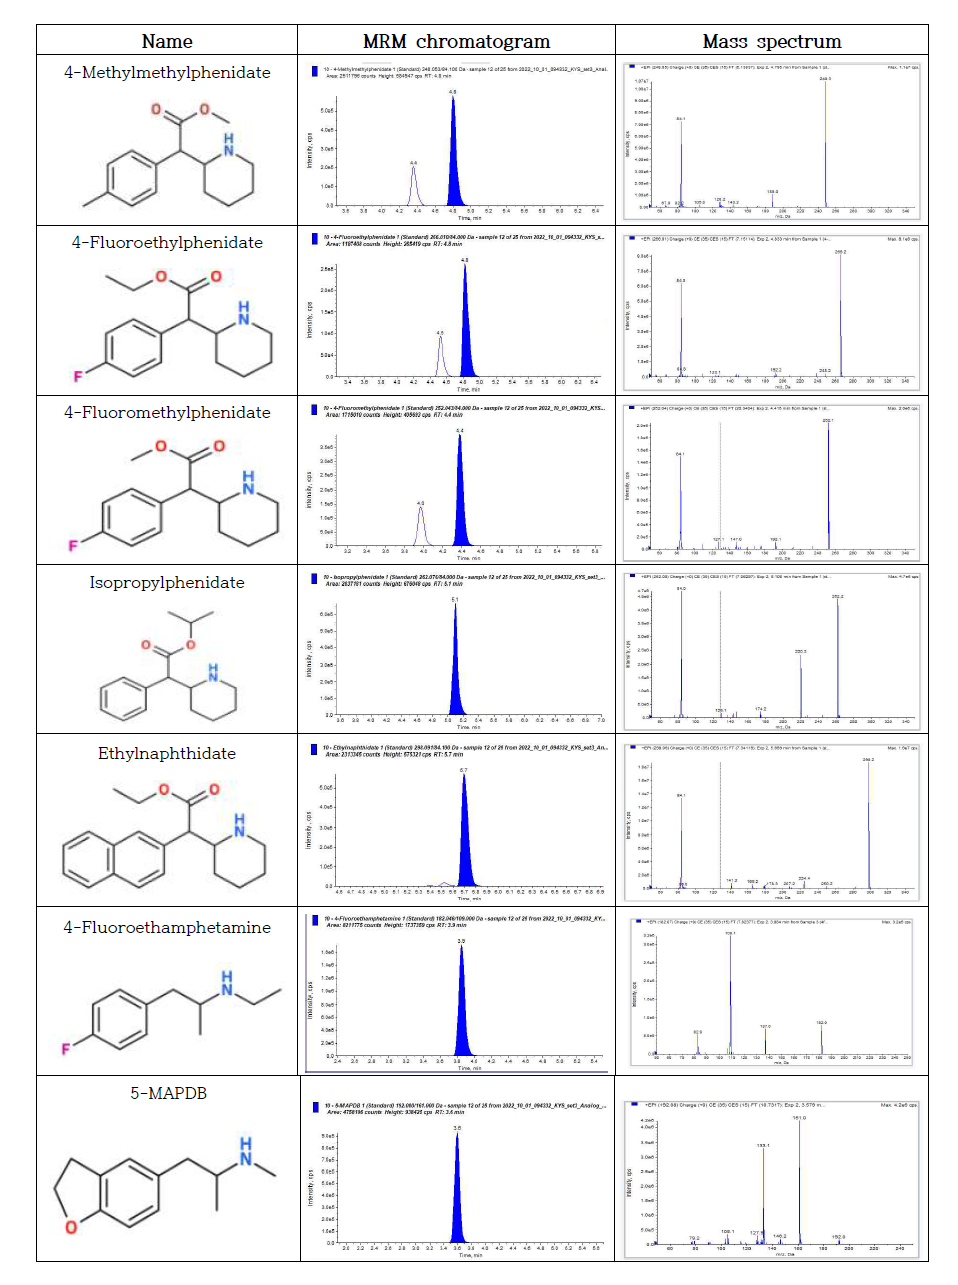 MRM transition and mass spectra for 18 phenylethylamine analogues and intern al standards(continued)